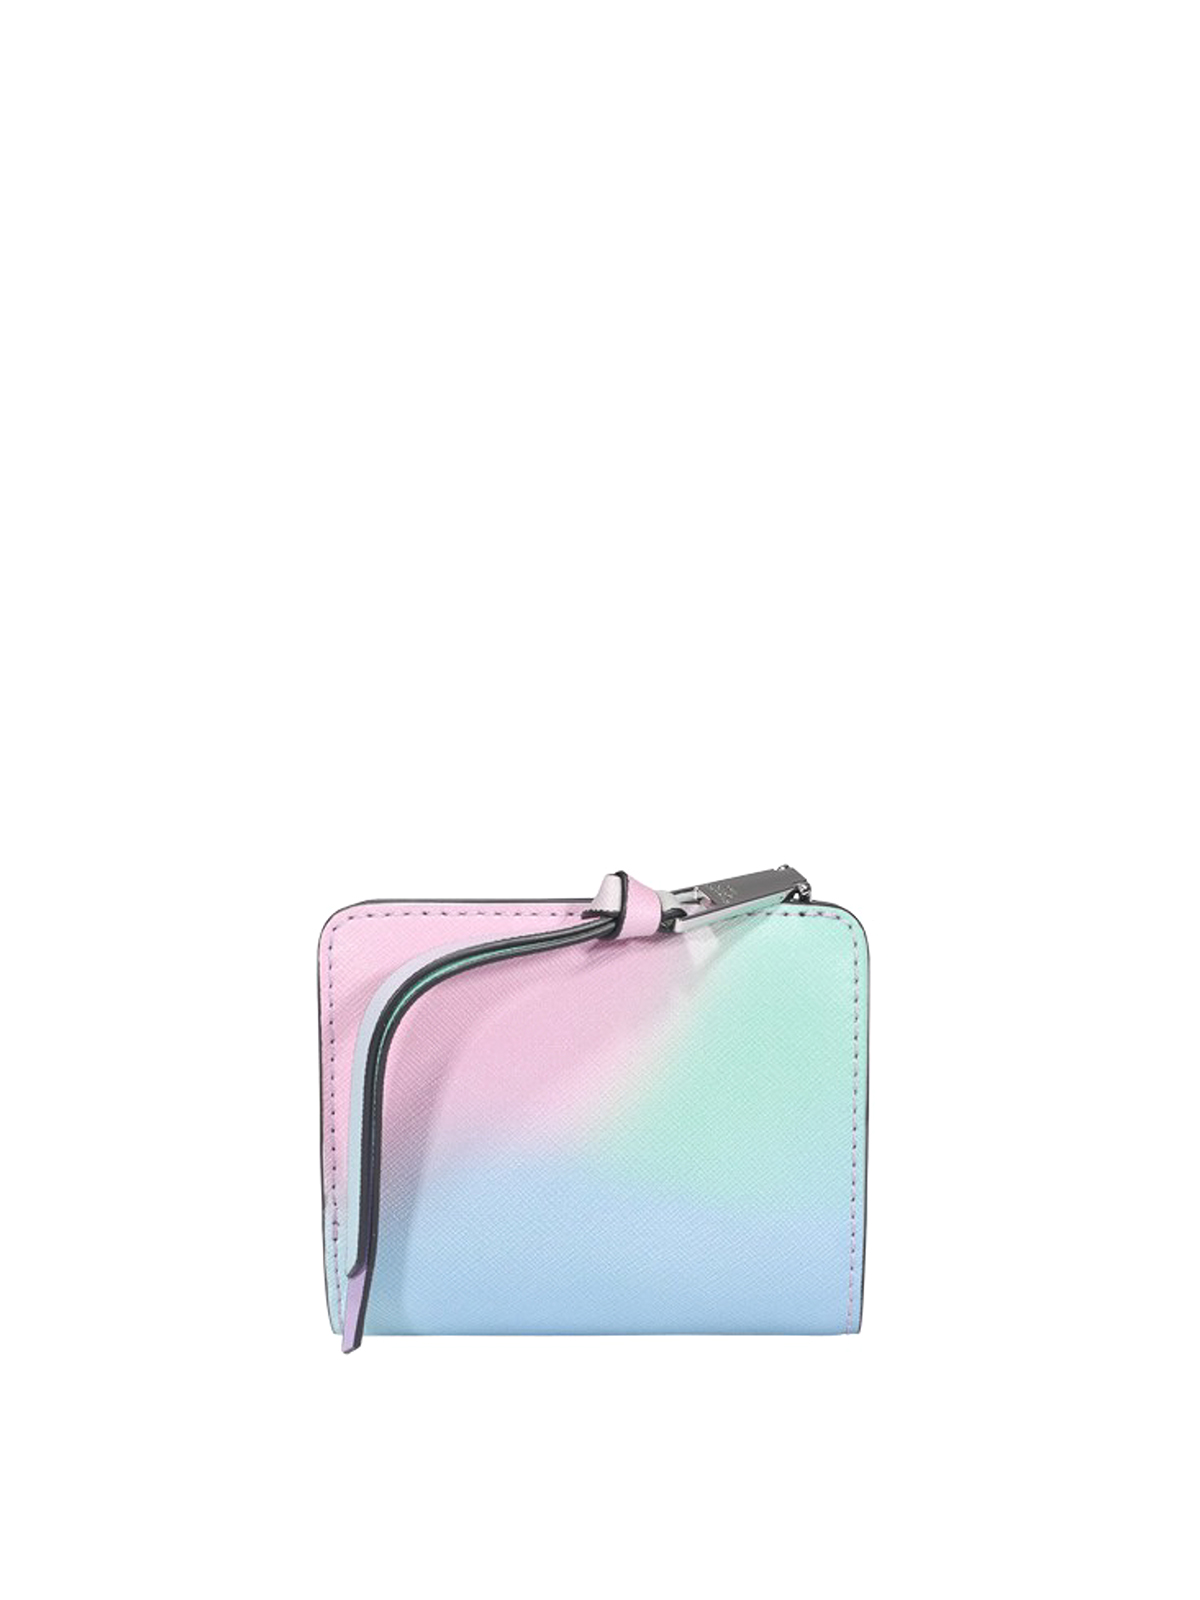 THE SNAPSHOT AIRBRUSH BAG BY MARC JACOBS